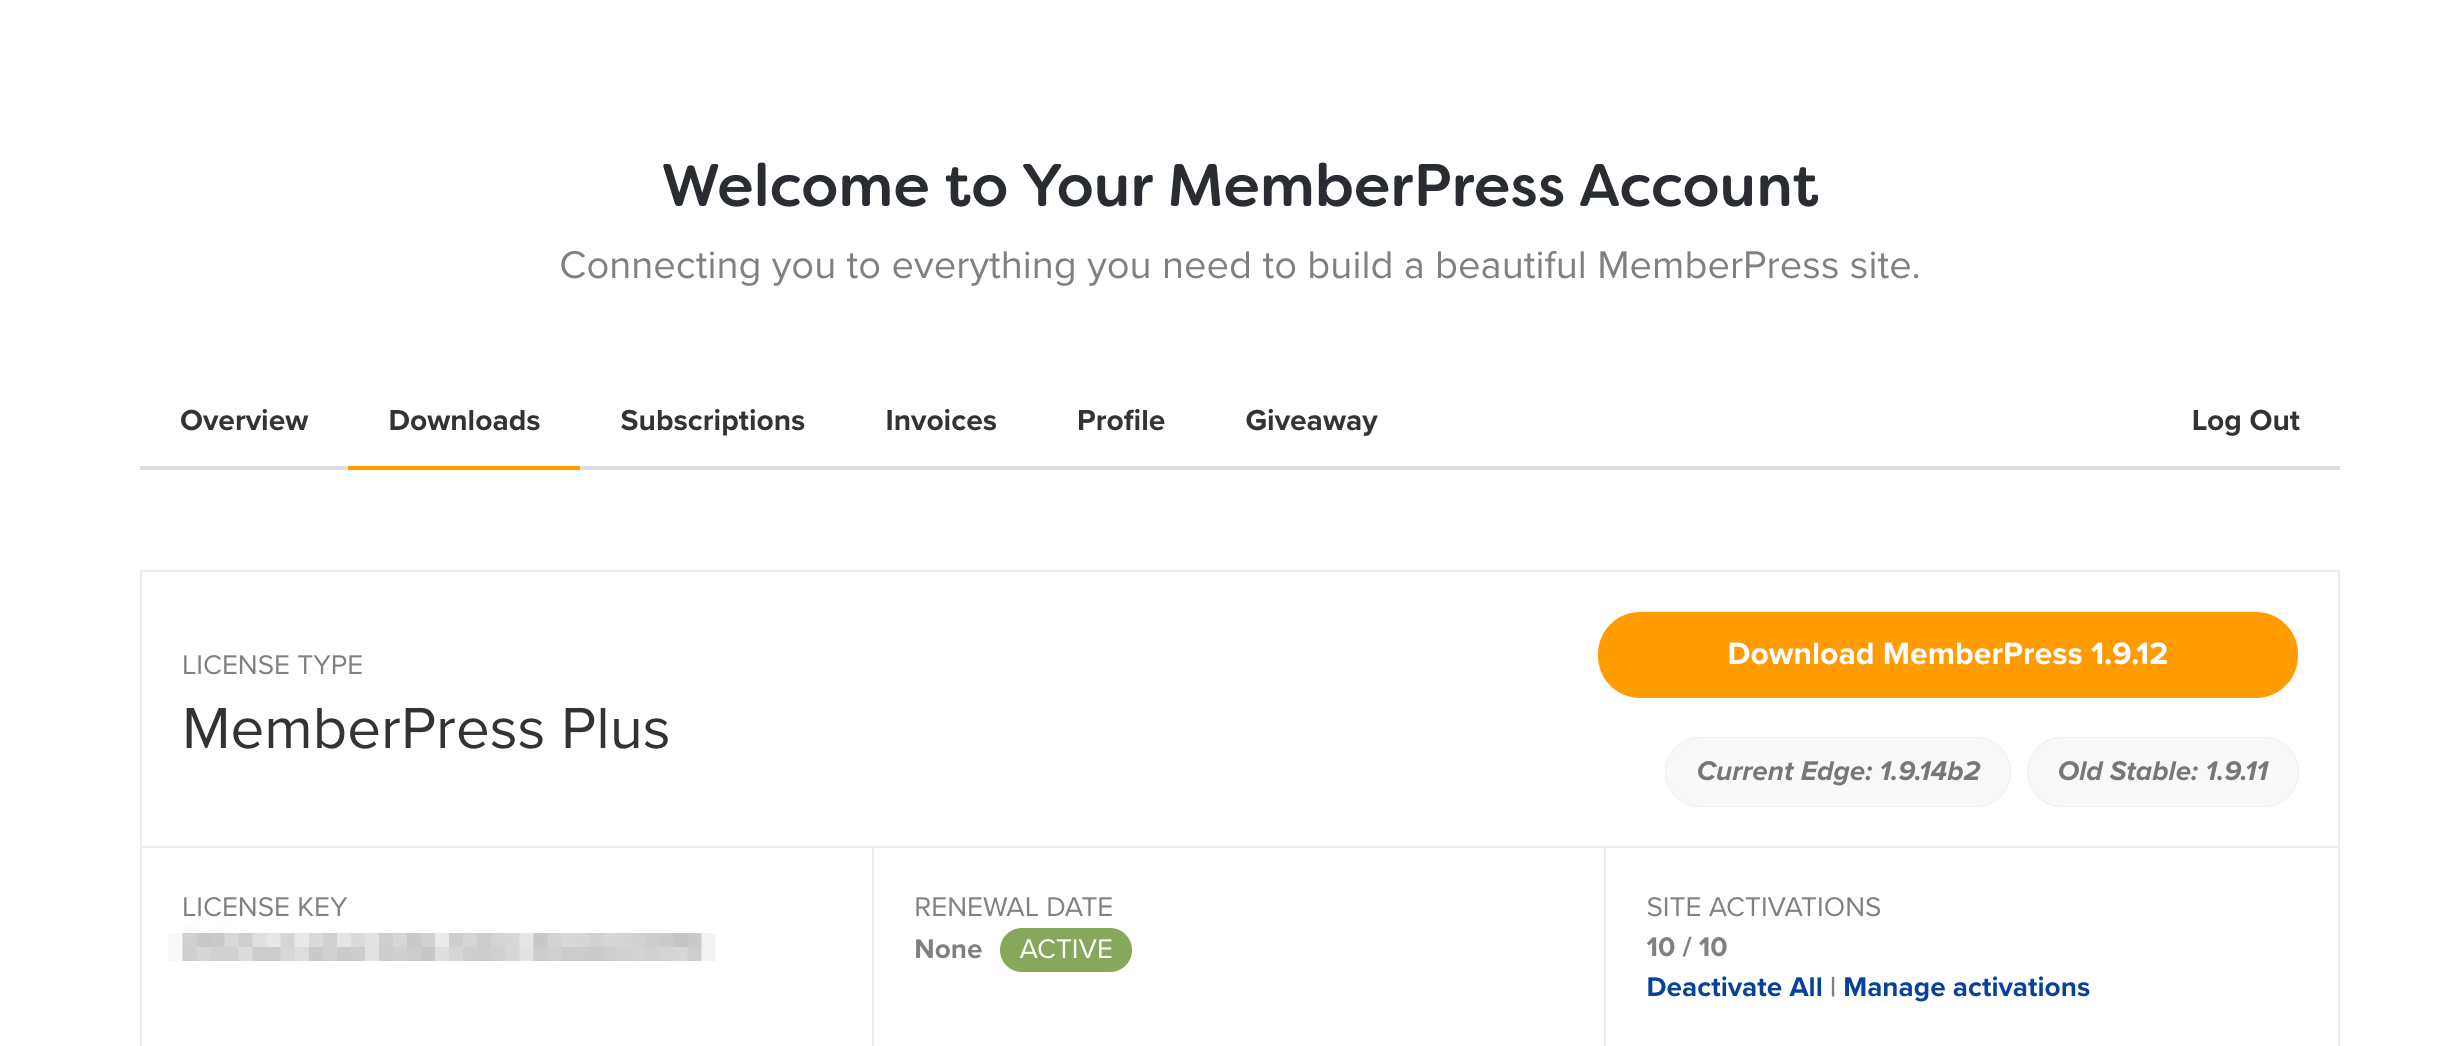 Downloading the MemberPress plugin from your account